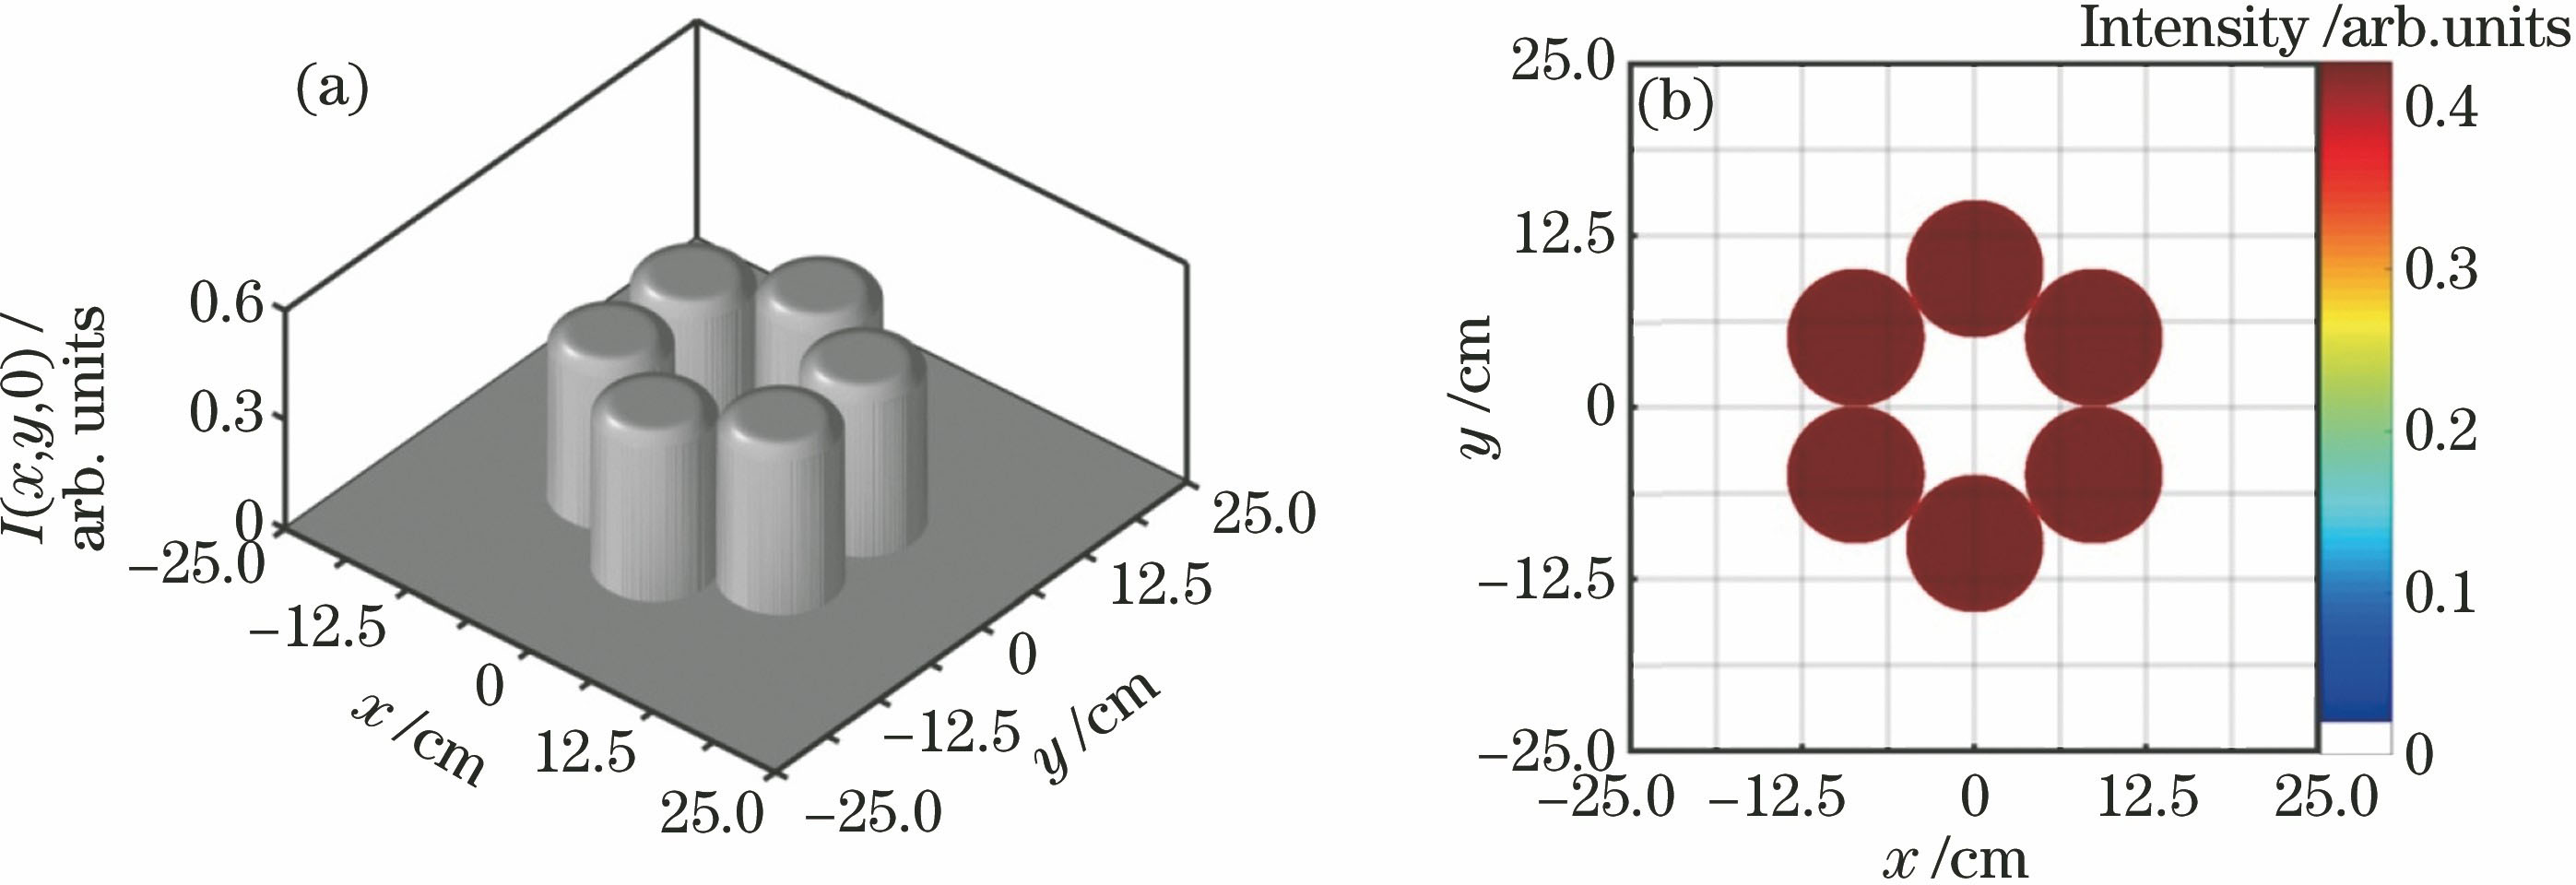 Intensity distribution of flat-topped laser beam array at source plane. (a) 3D distribution; (b) 2D distribution